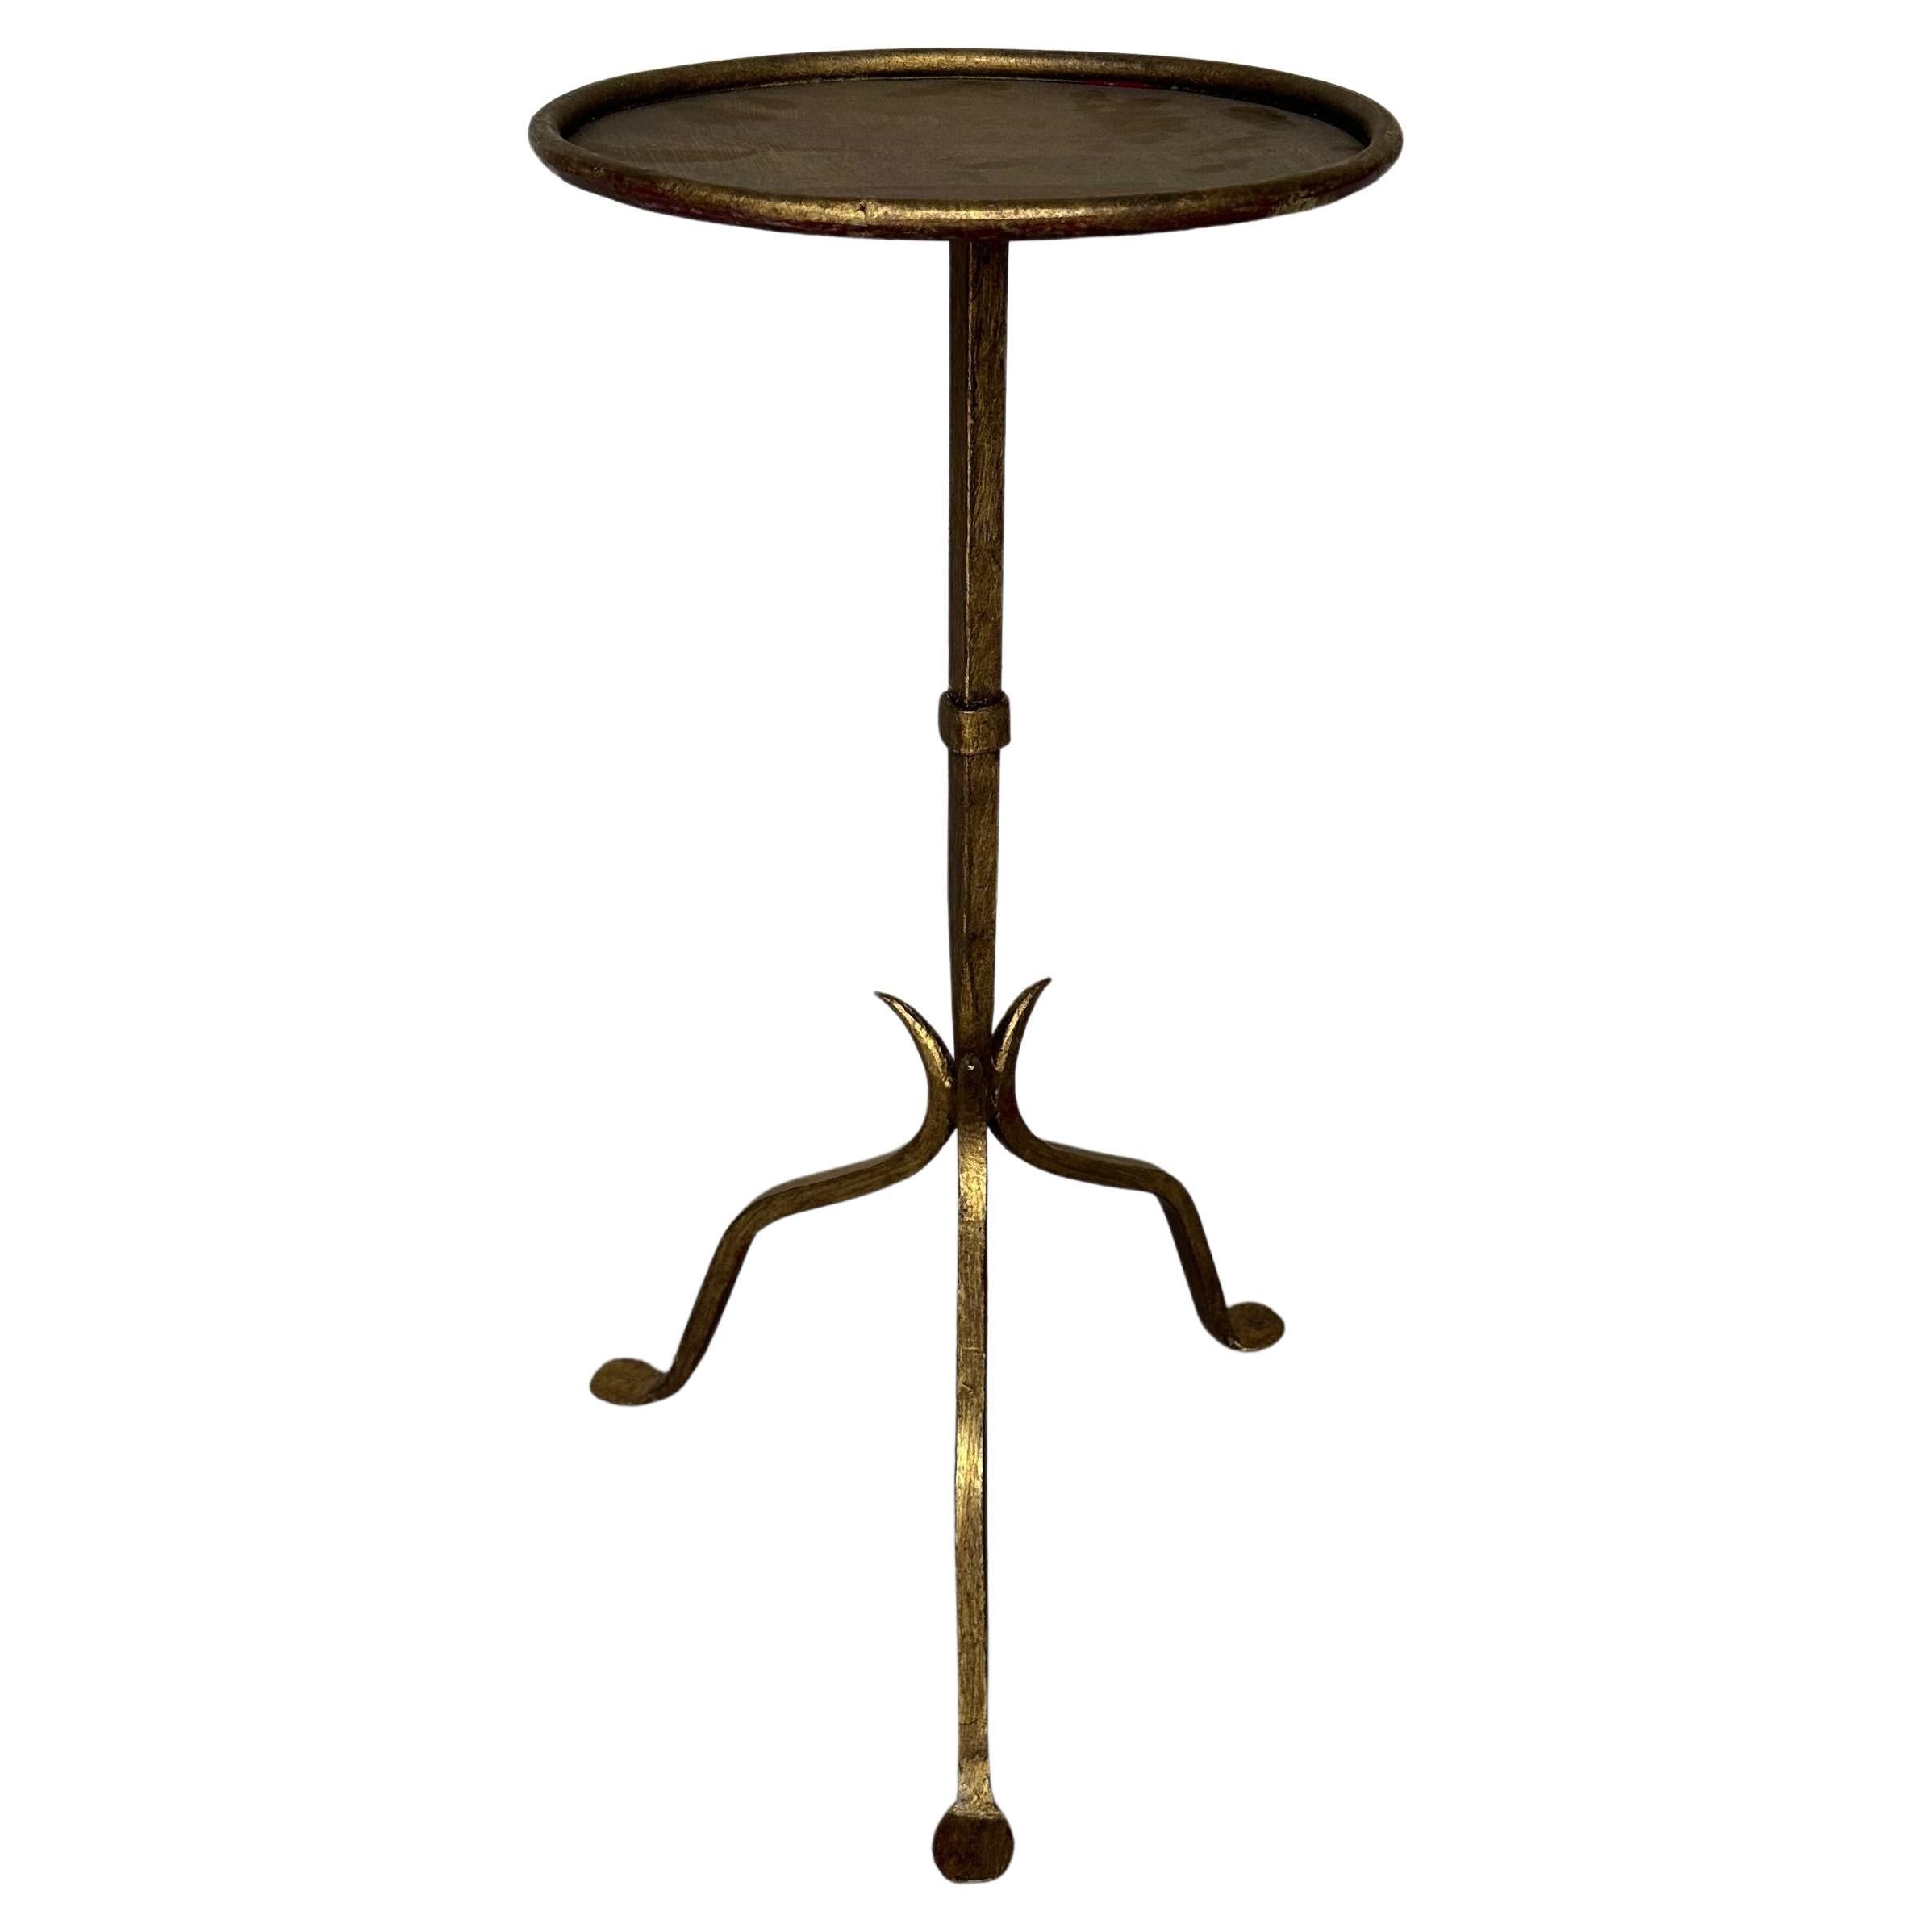 Small Spanish Iron Drinks Table with Pointed Stem